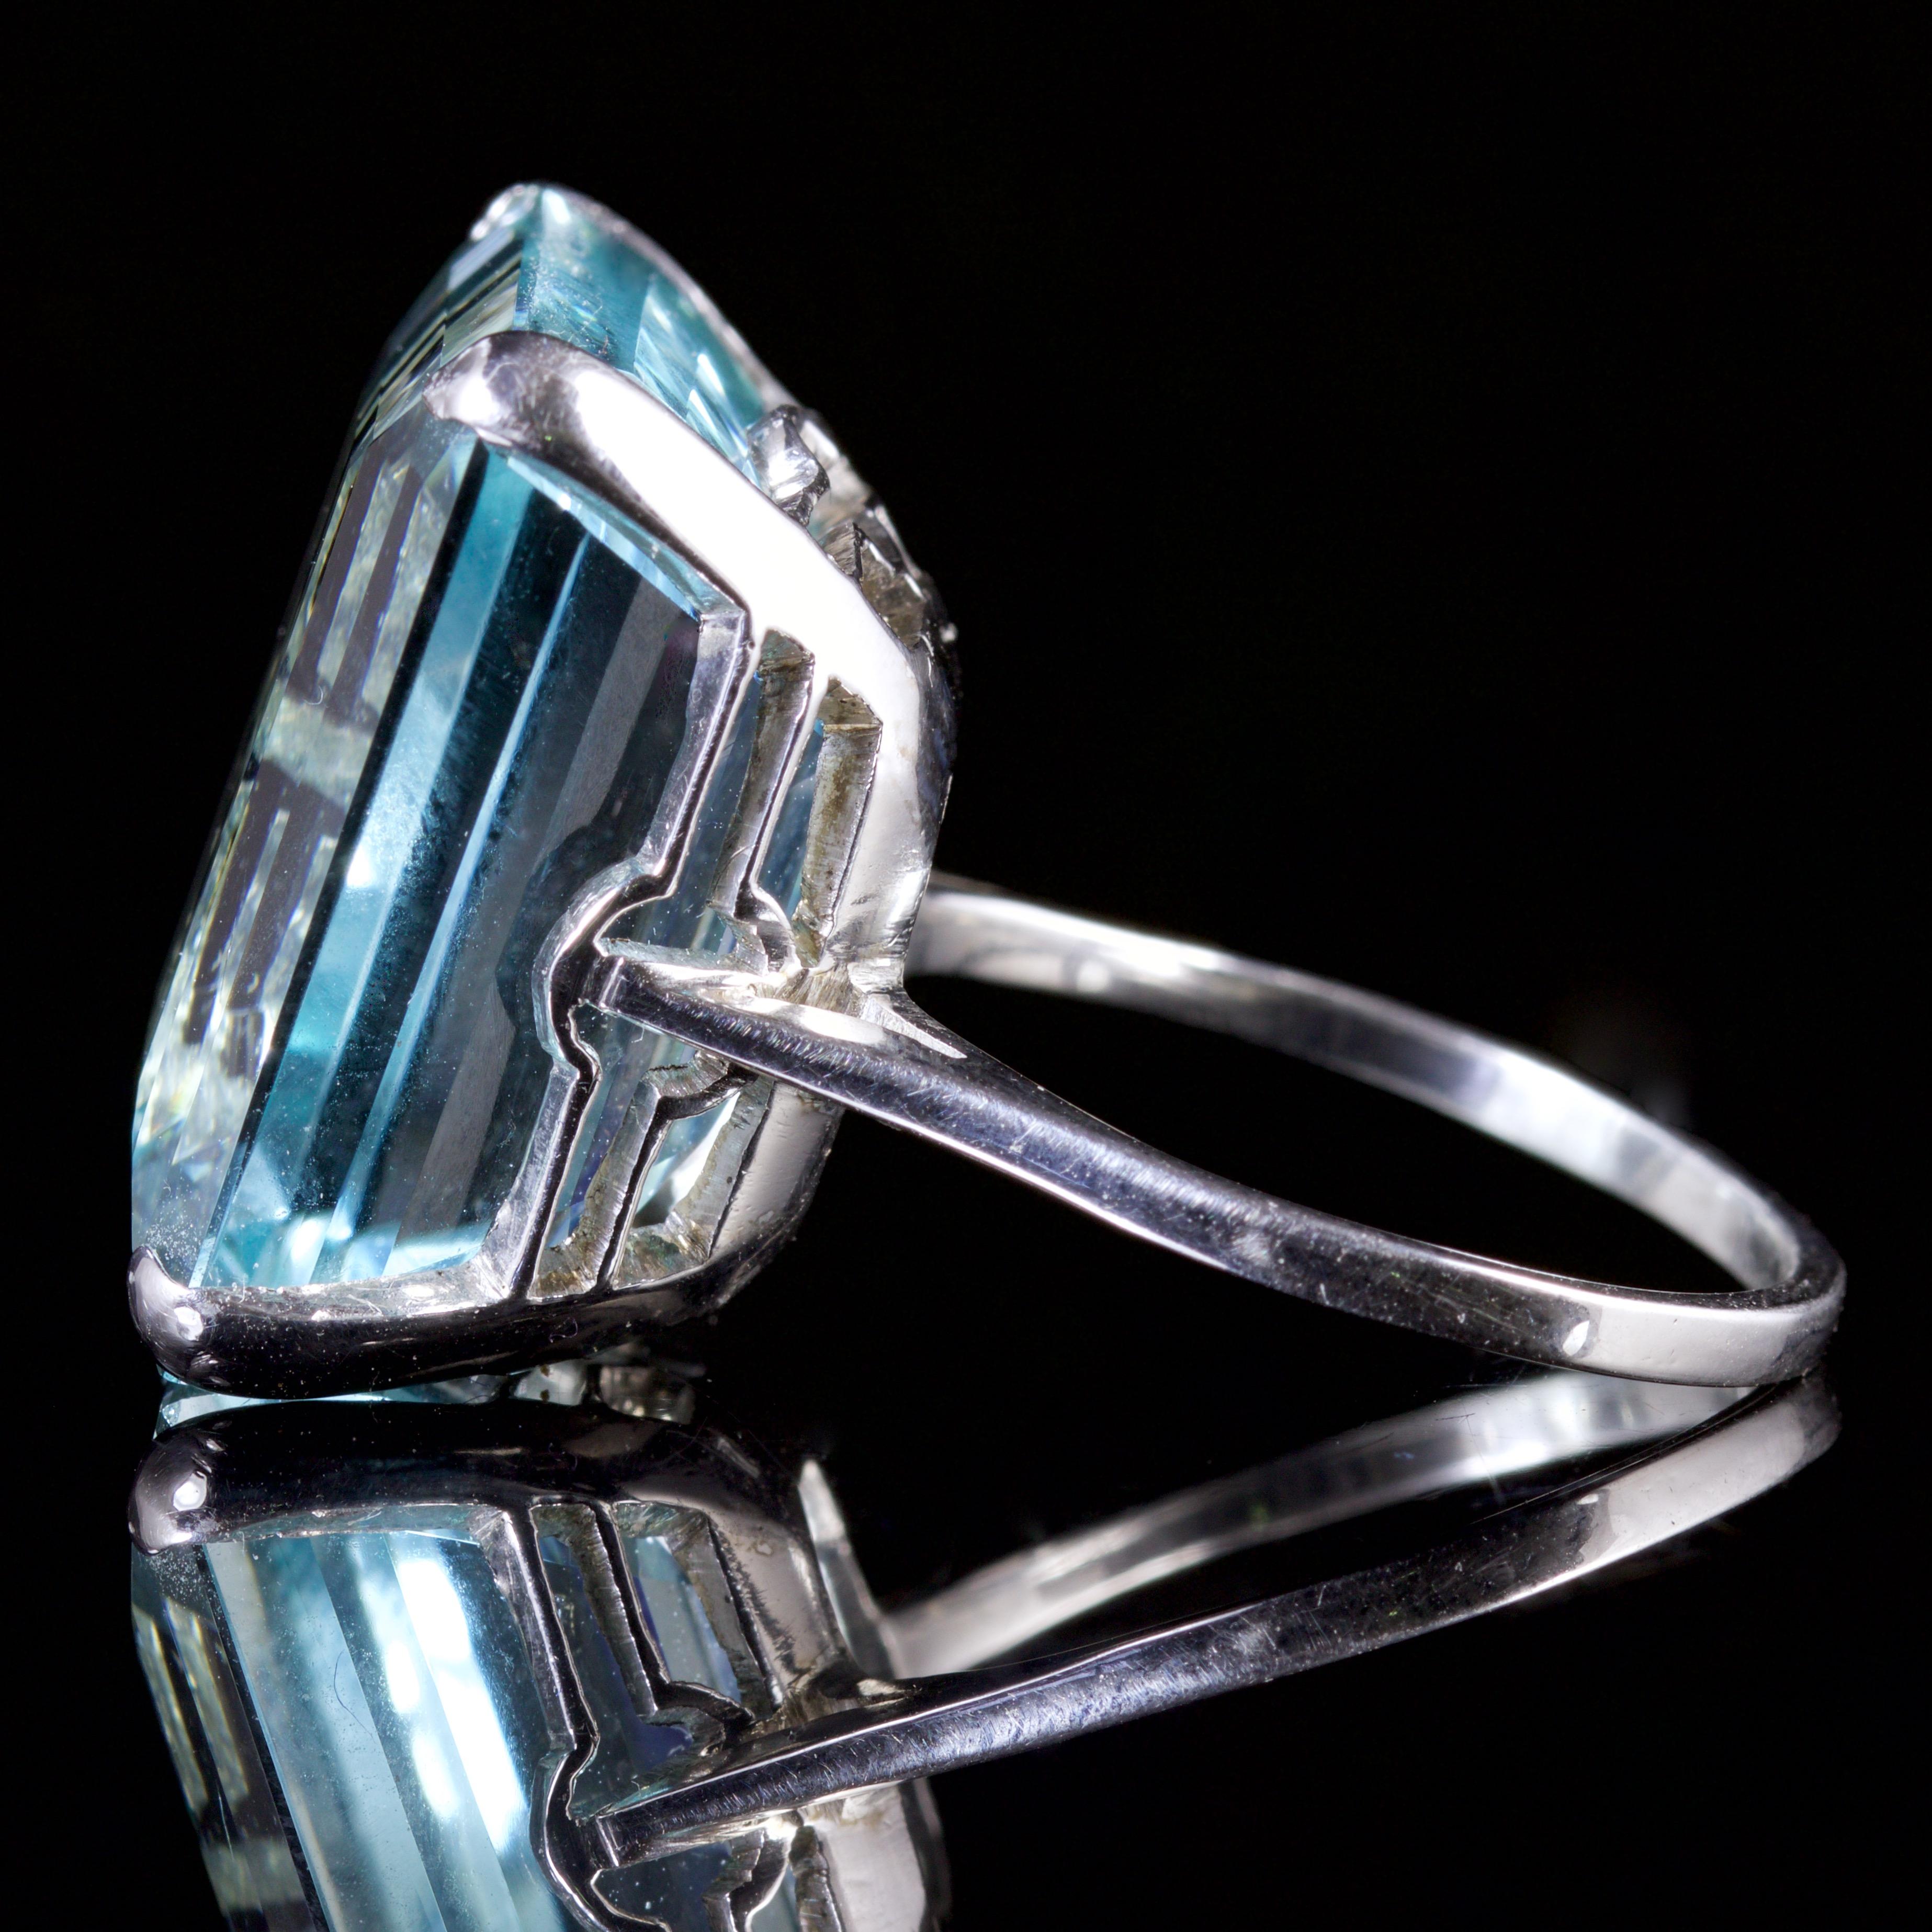 

The ring is set with a beautiful emerald cut Aquamarine which is over 35ct in size.

The Aquamarine is a rich ocean blue with a play of green 
projecting through, this is a truly fabulous.

The sky blue of the Aquamarine makes it one of the